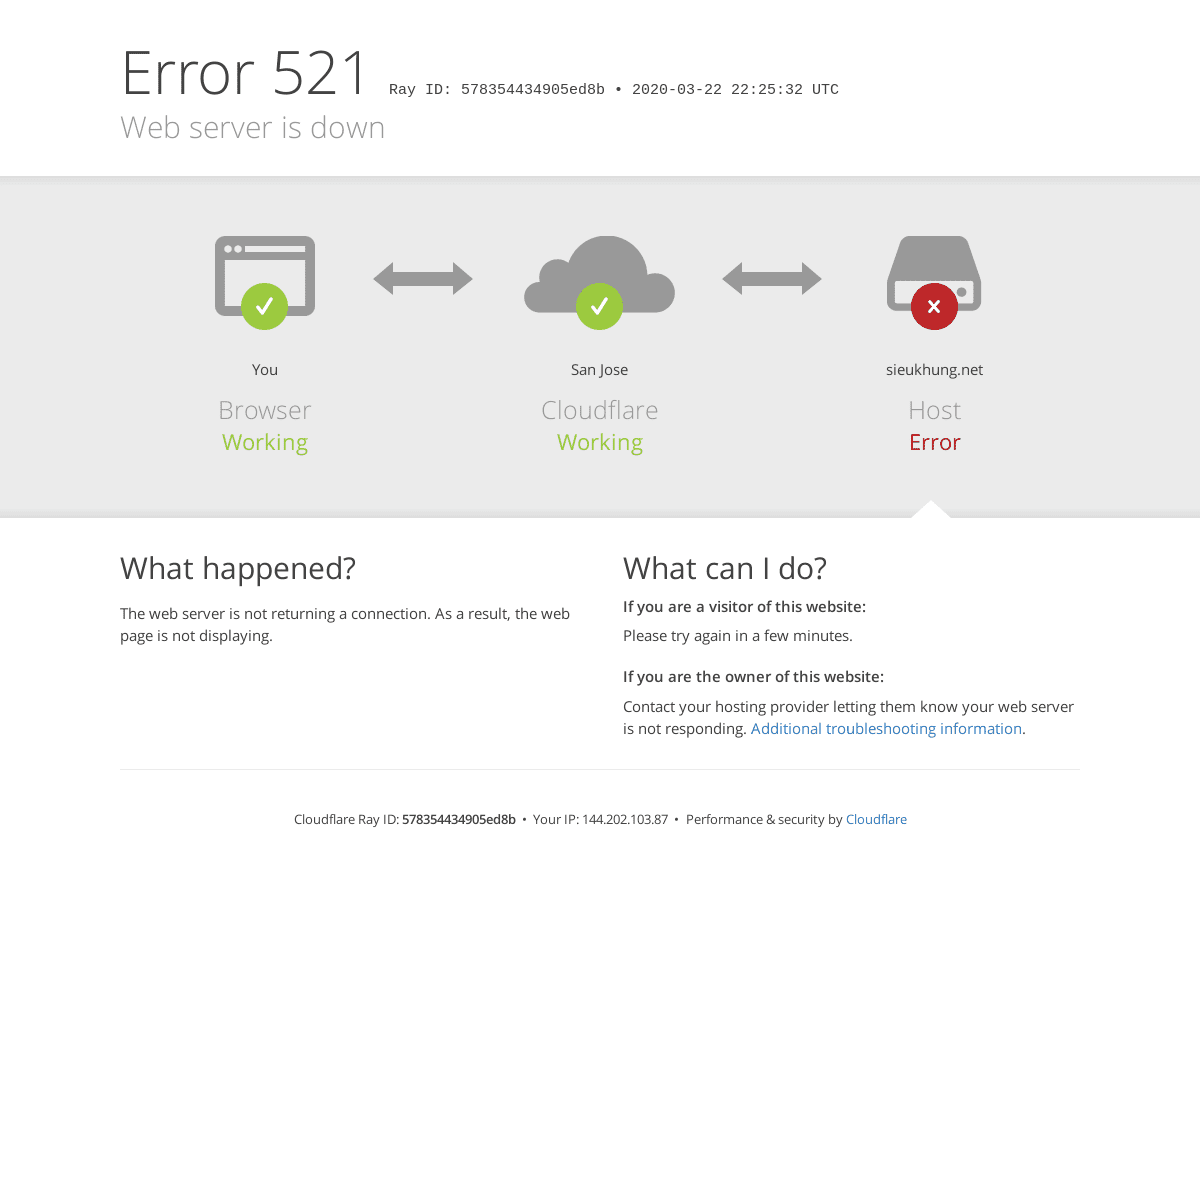 sieukhung.net - 521- Web server is down